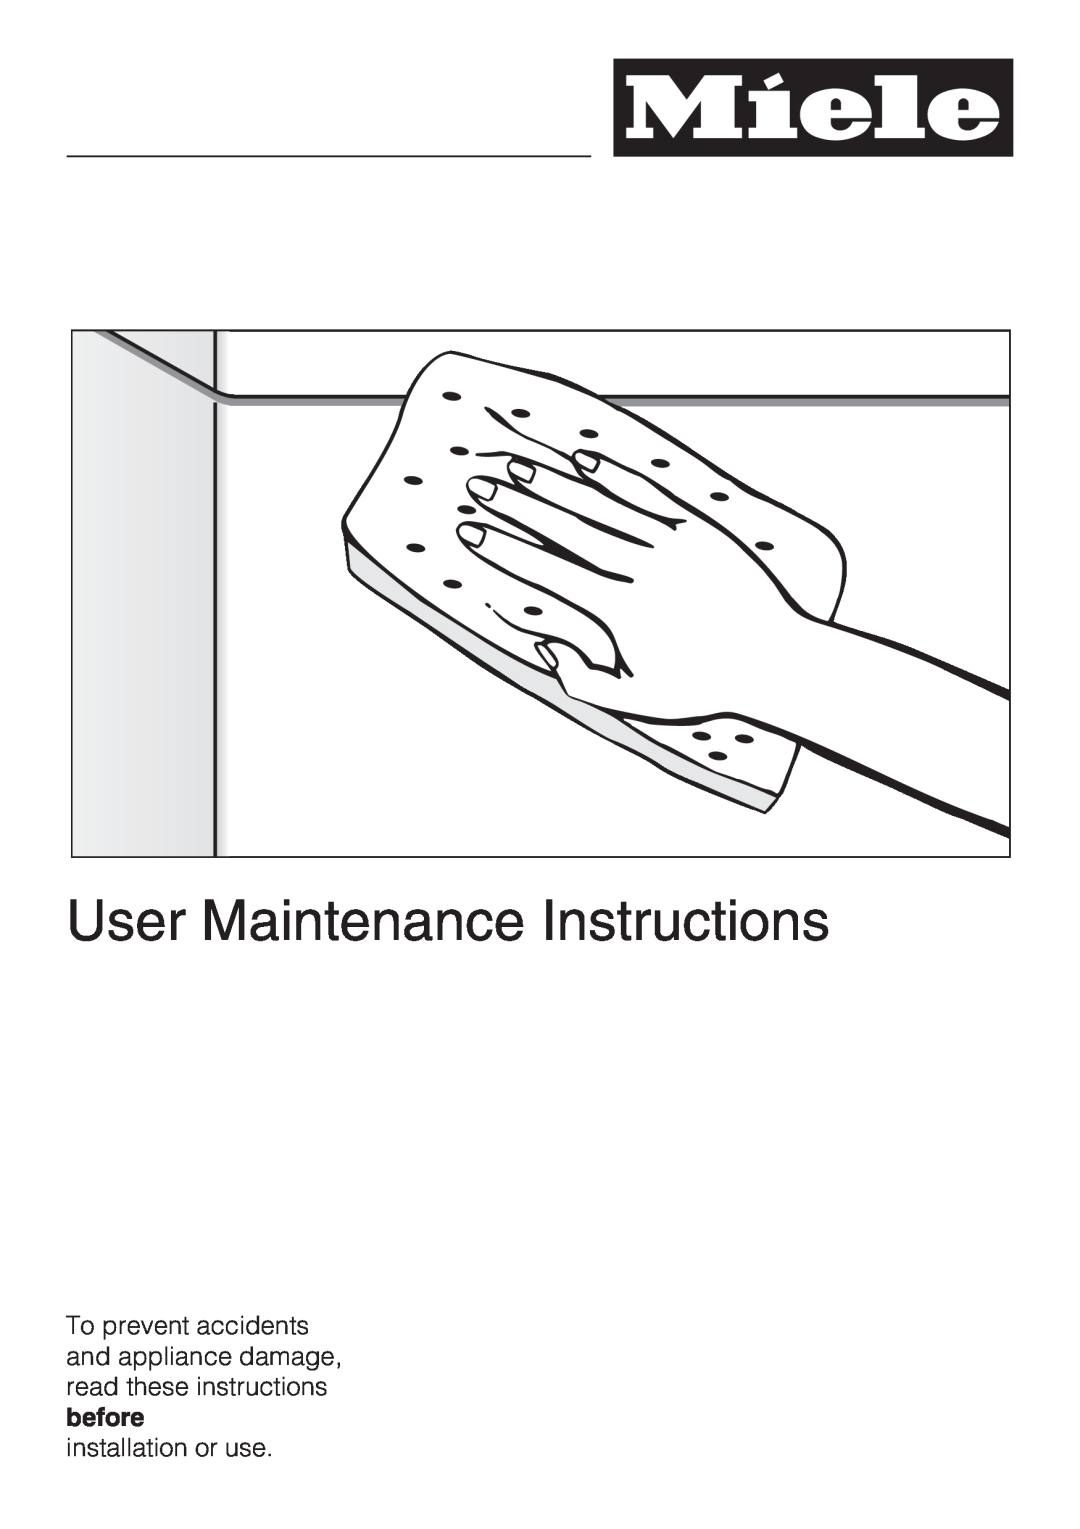 Miele G 2432 manual User Maintenance Instructions, installation or use 